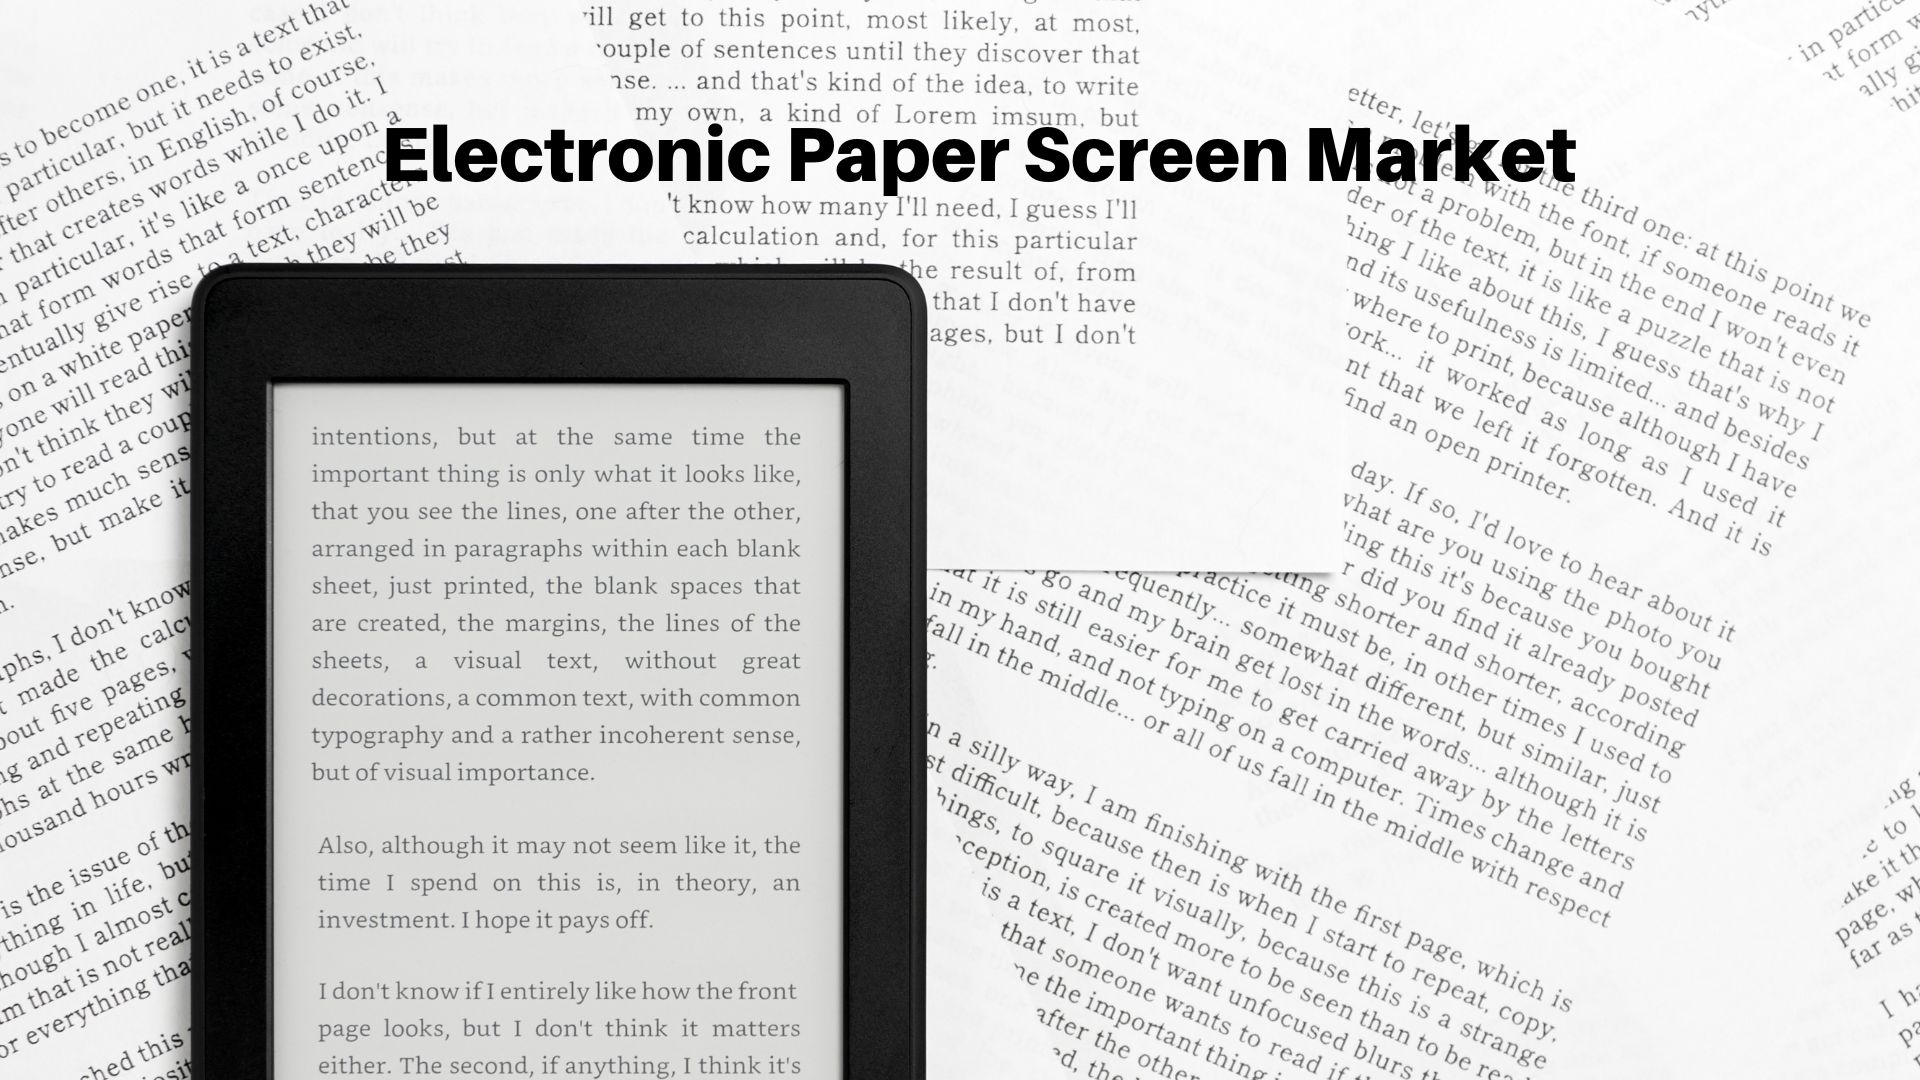 Global Electronic Paper Screen Market Size is expected to increase from USD 3.46 billion in 2022 to USD 5.58 billion by 2032